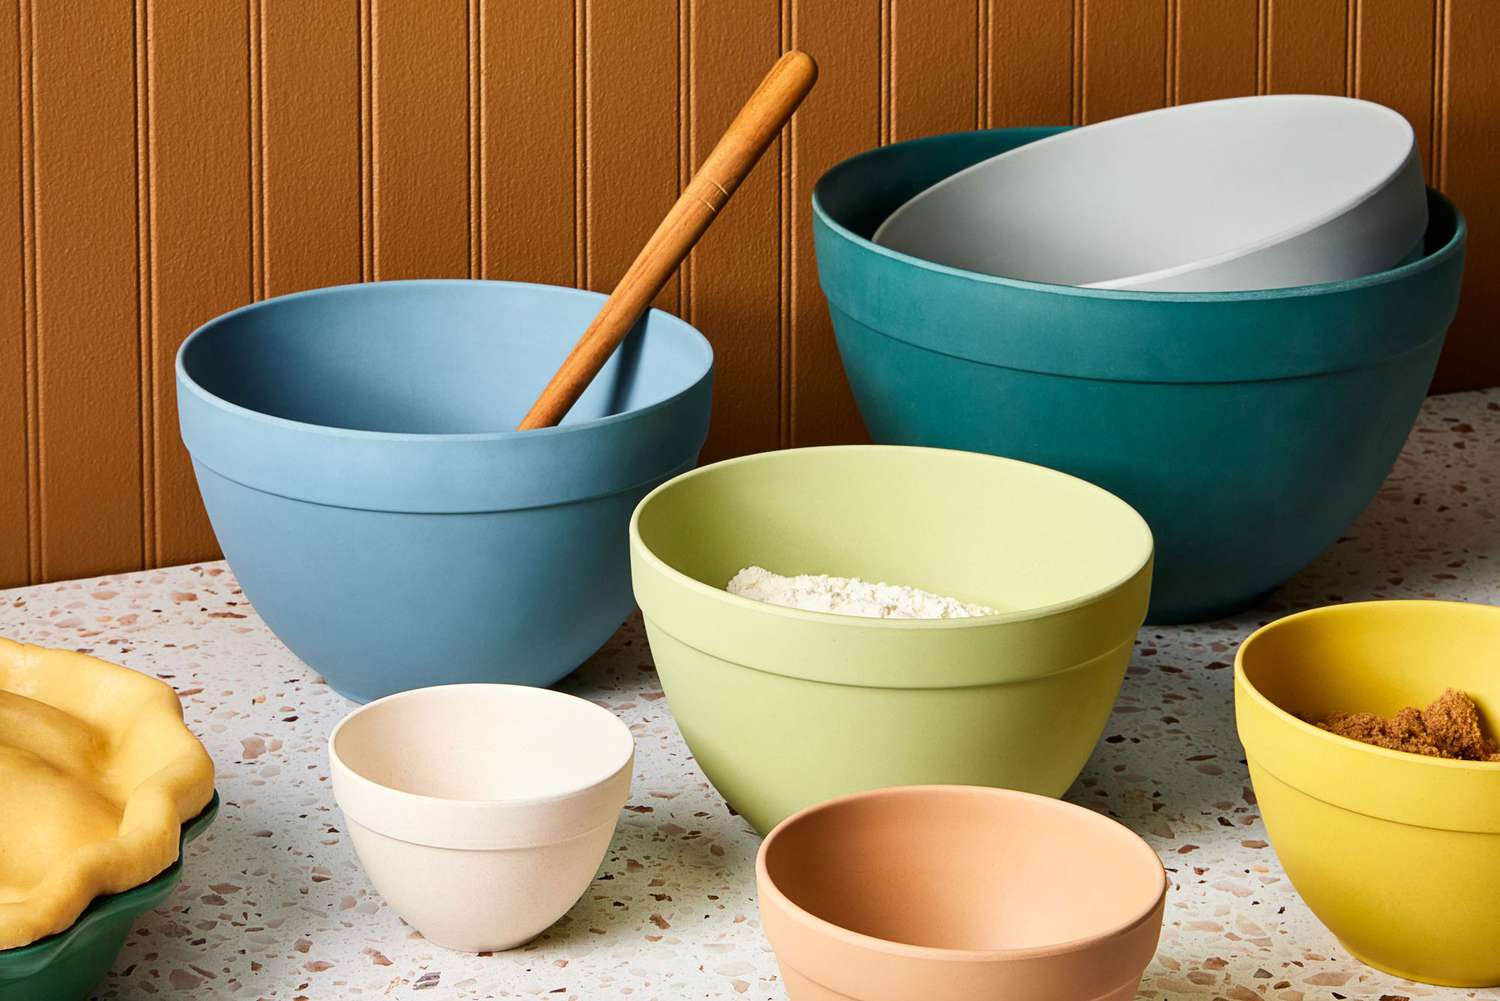 Review: Best Mixing Bowl Set for Baking Enthusiasts